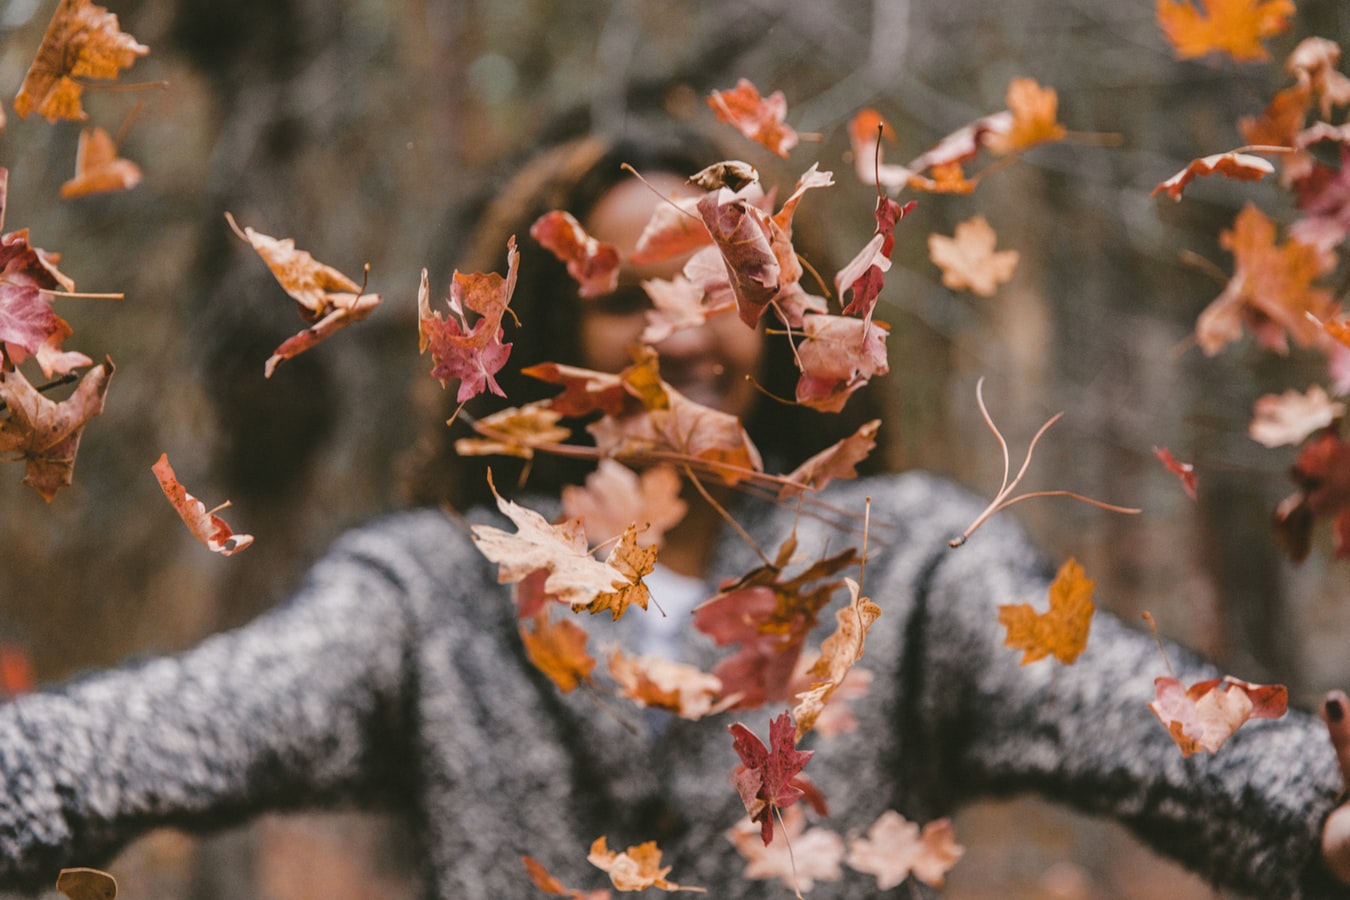 Want to Clean Tons of Leaves in an Instant? Here’s How